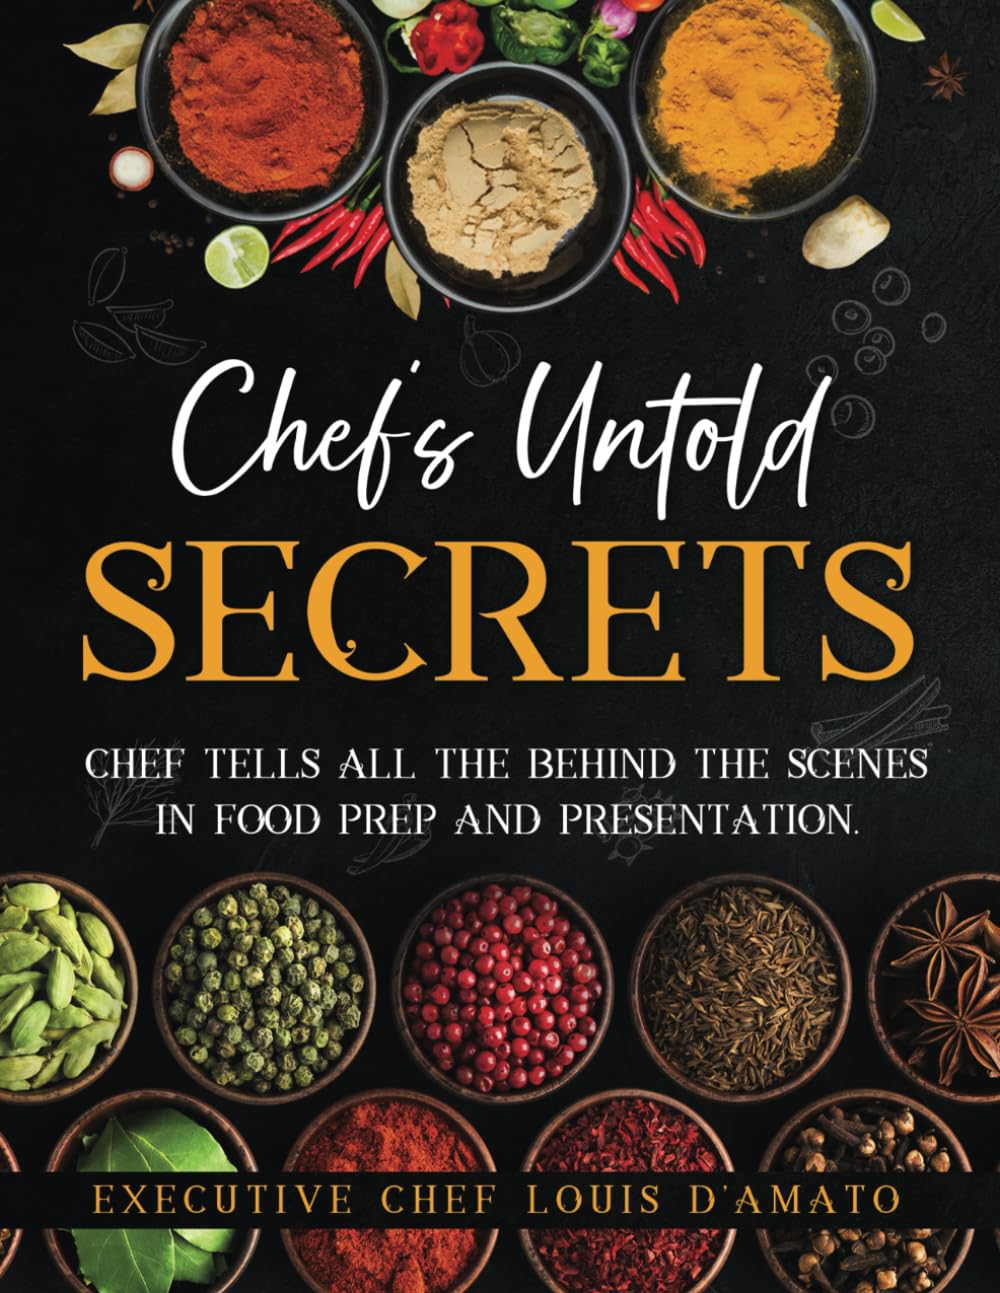 CHEF'S UNTOLD SECRETS: Chef tells all the behind the scenes in food prep and presentation.